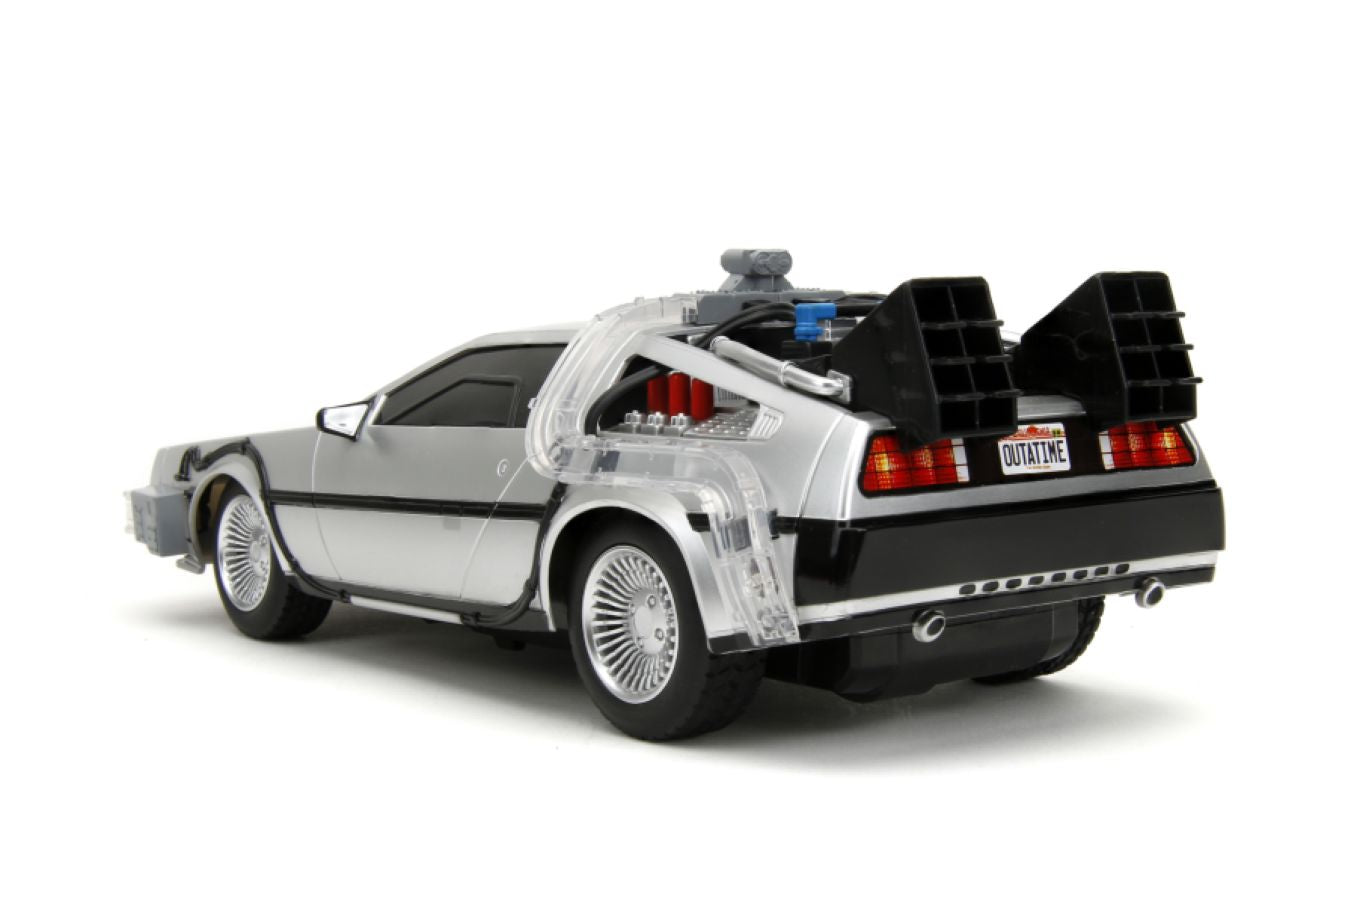 Back to the Future - Time Machine Remote Control 1:16 Scale Vehicle (with Light Up Function)